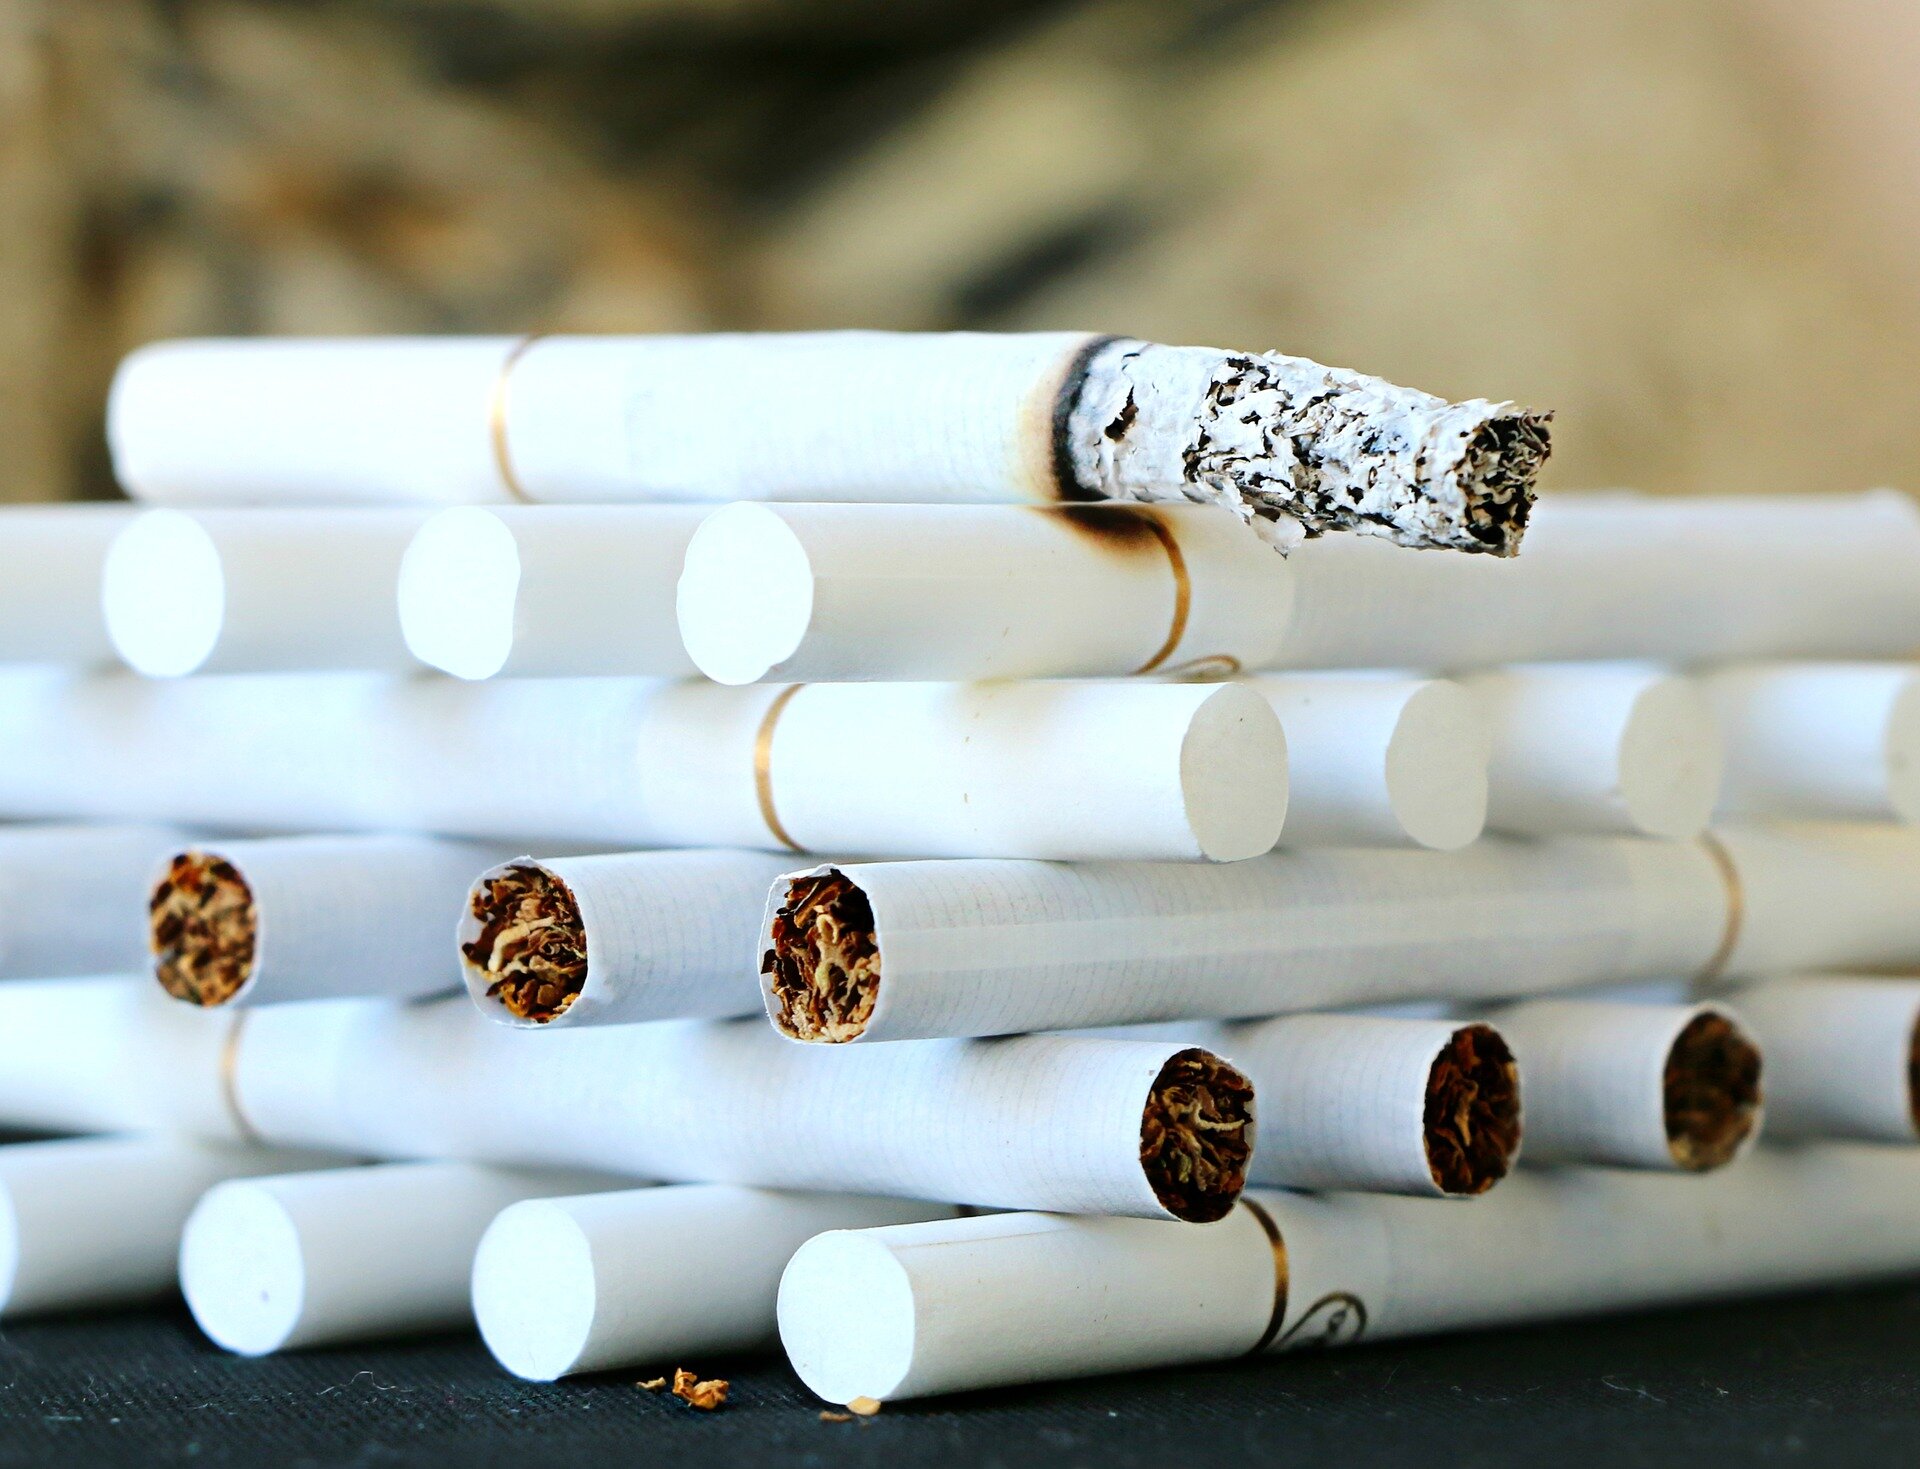 #Canada to require a warning be printed on every cigarette